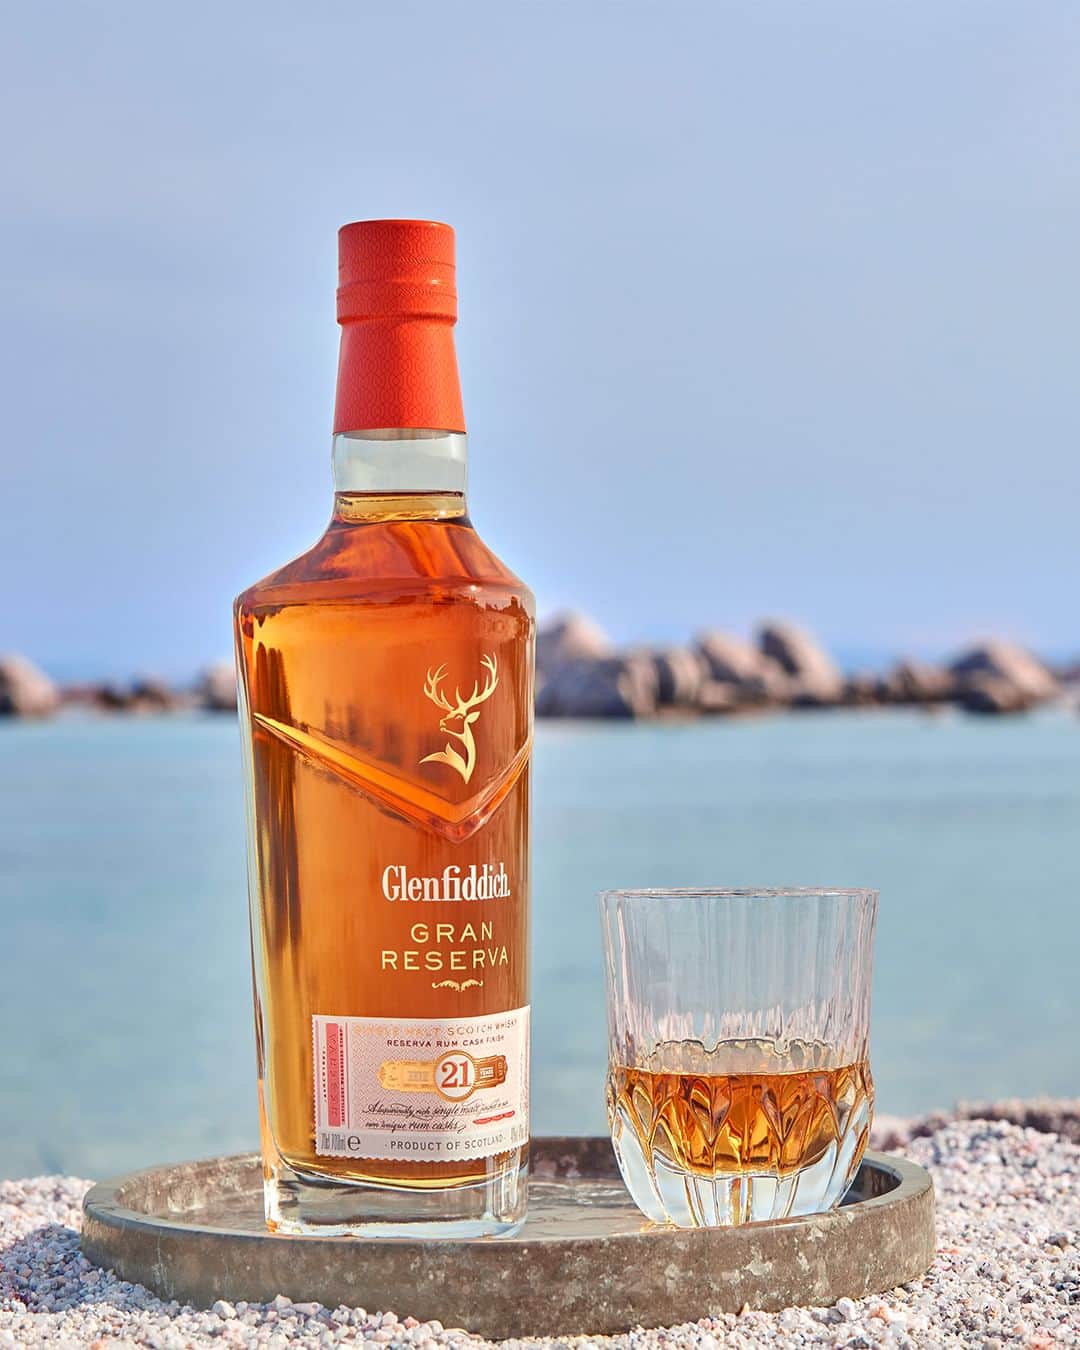 Glenfiddichのインスタグラム：「The heat is ringing in refreshing tastes of sharp ginger and energizing lime. Stay cool with the tropical breeze of our 21 year old Gran Reserva.  Raised in Scotland. Roused by the Caribbean.  Skilfully crafted. Enjoy responsibly. #Glenfiddich #GranReserva」